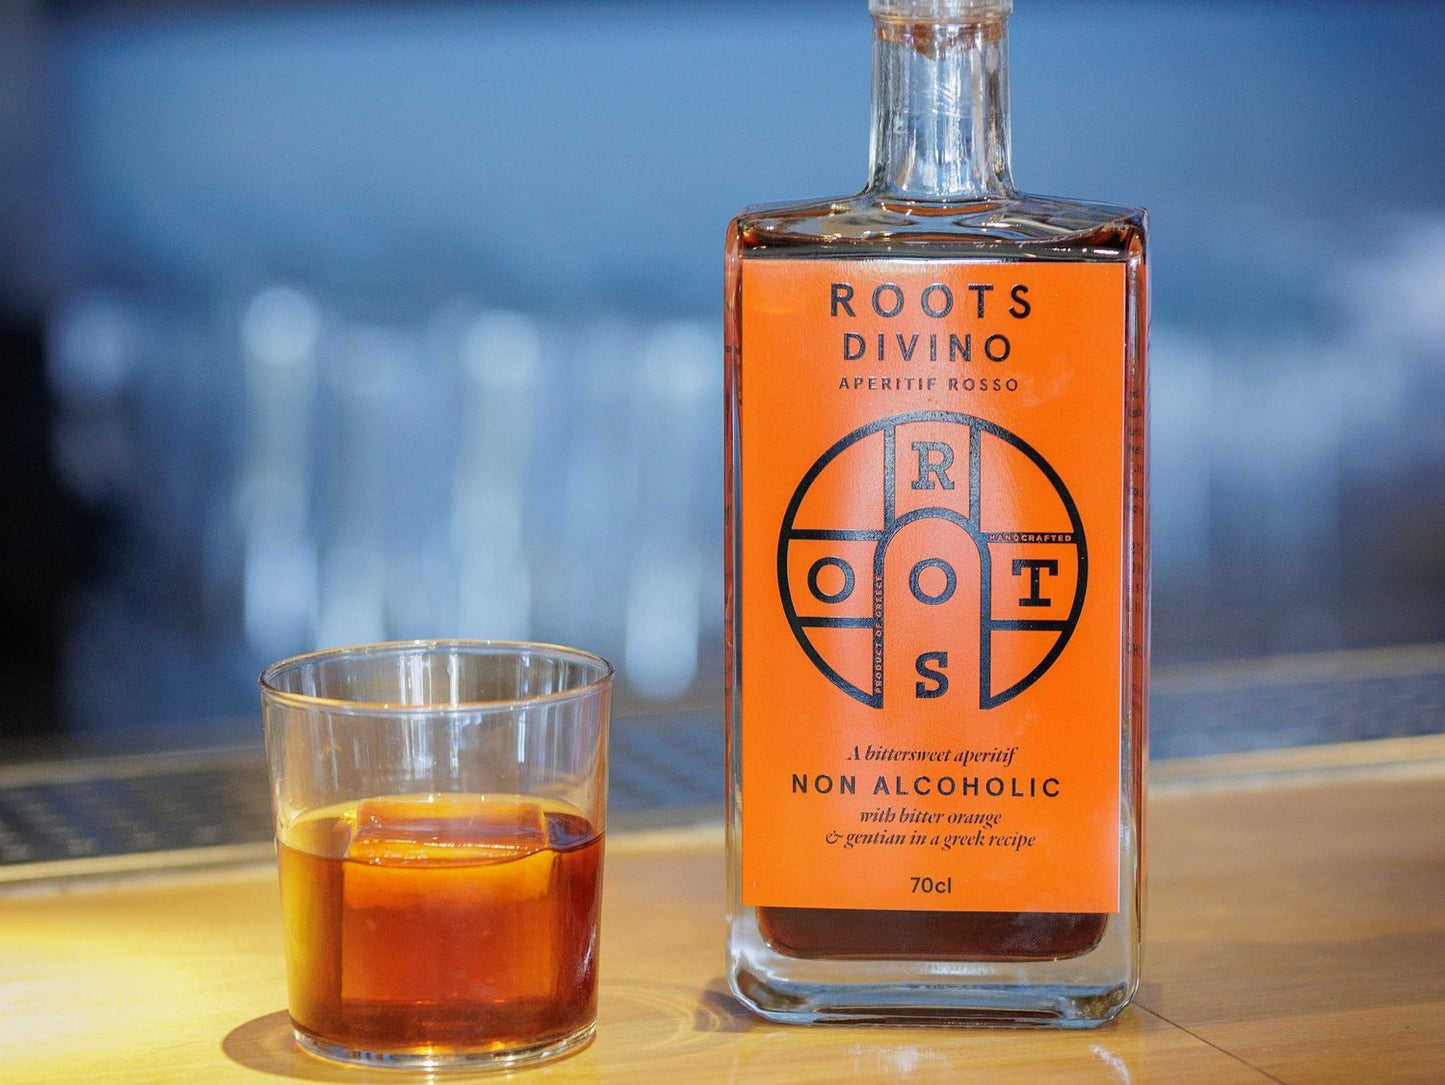 Roots Divino Aperitif Rosso Non-Alcoholic Sweet Vermouth